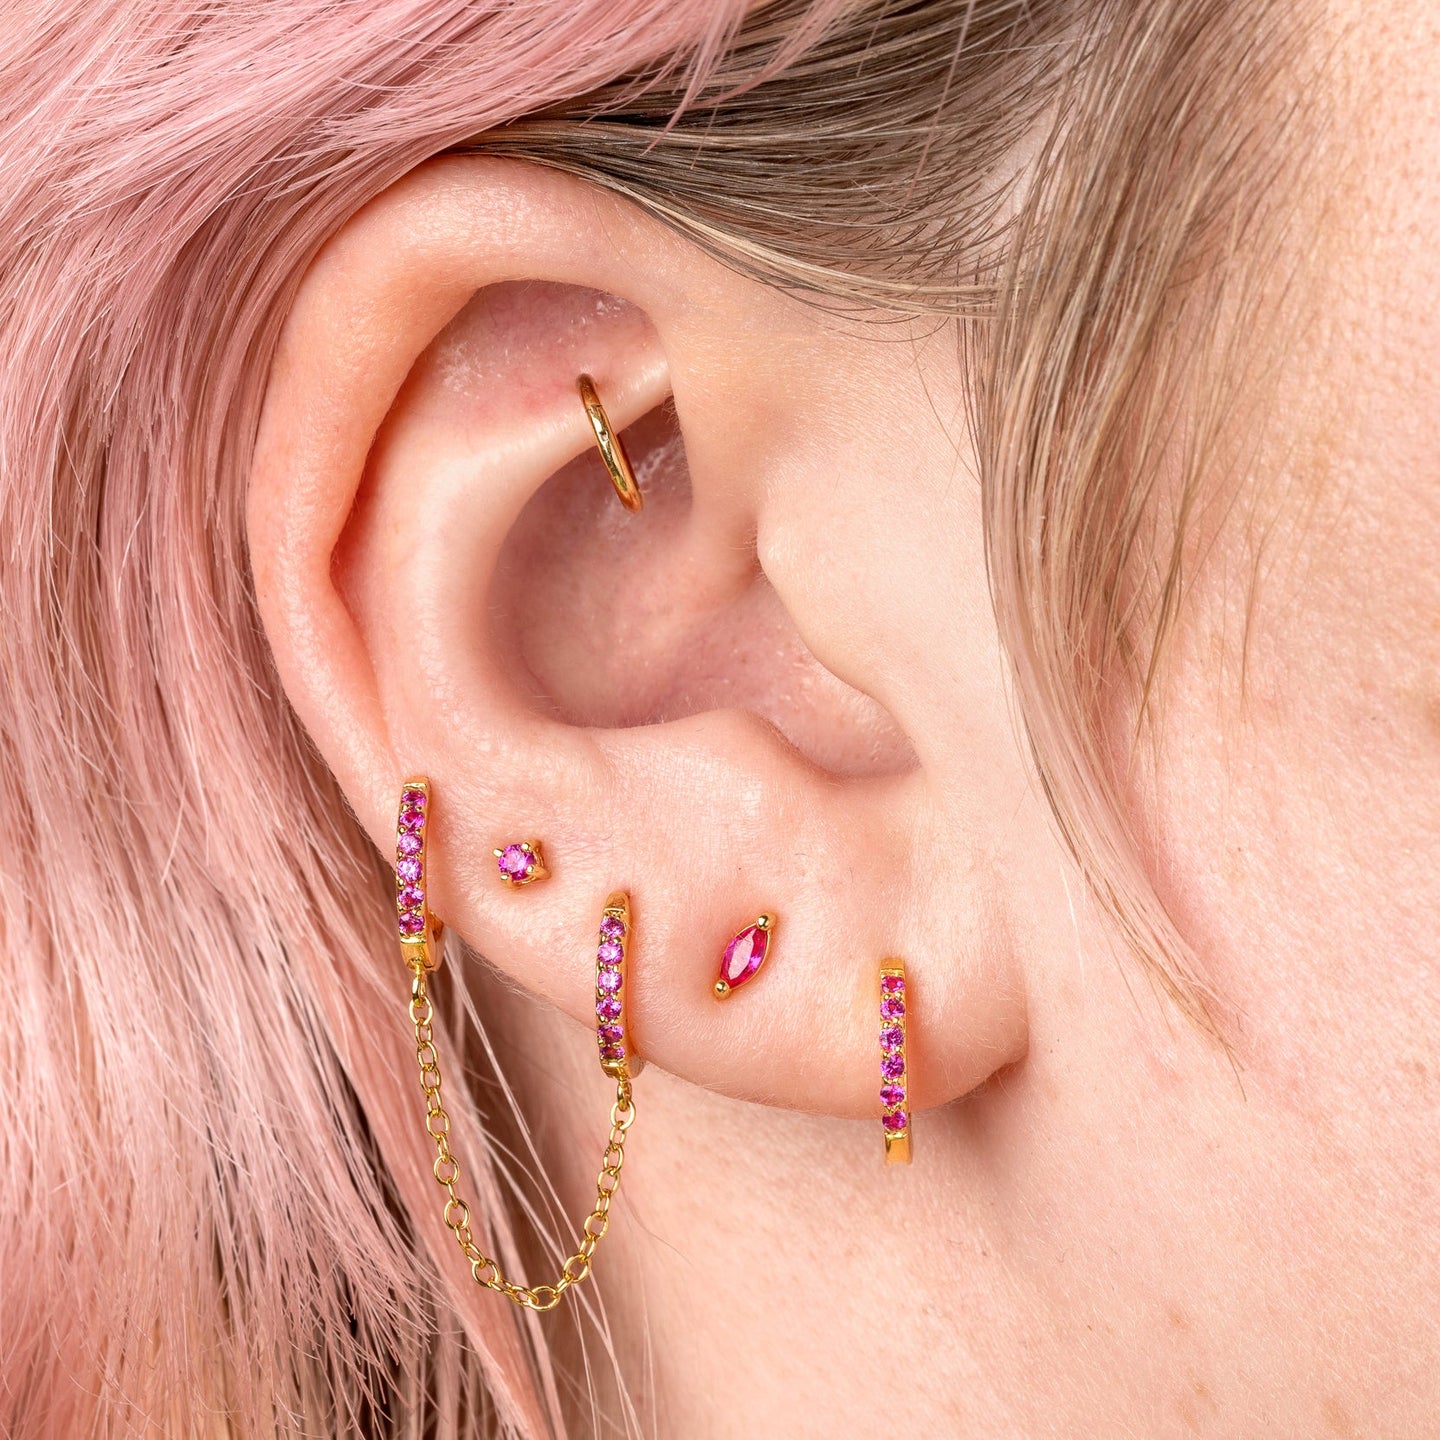 The marquise mini stud features a pink oblong shaped gem and has gold accents. [hover] color:gold/pink